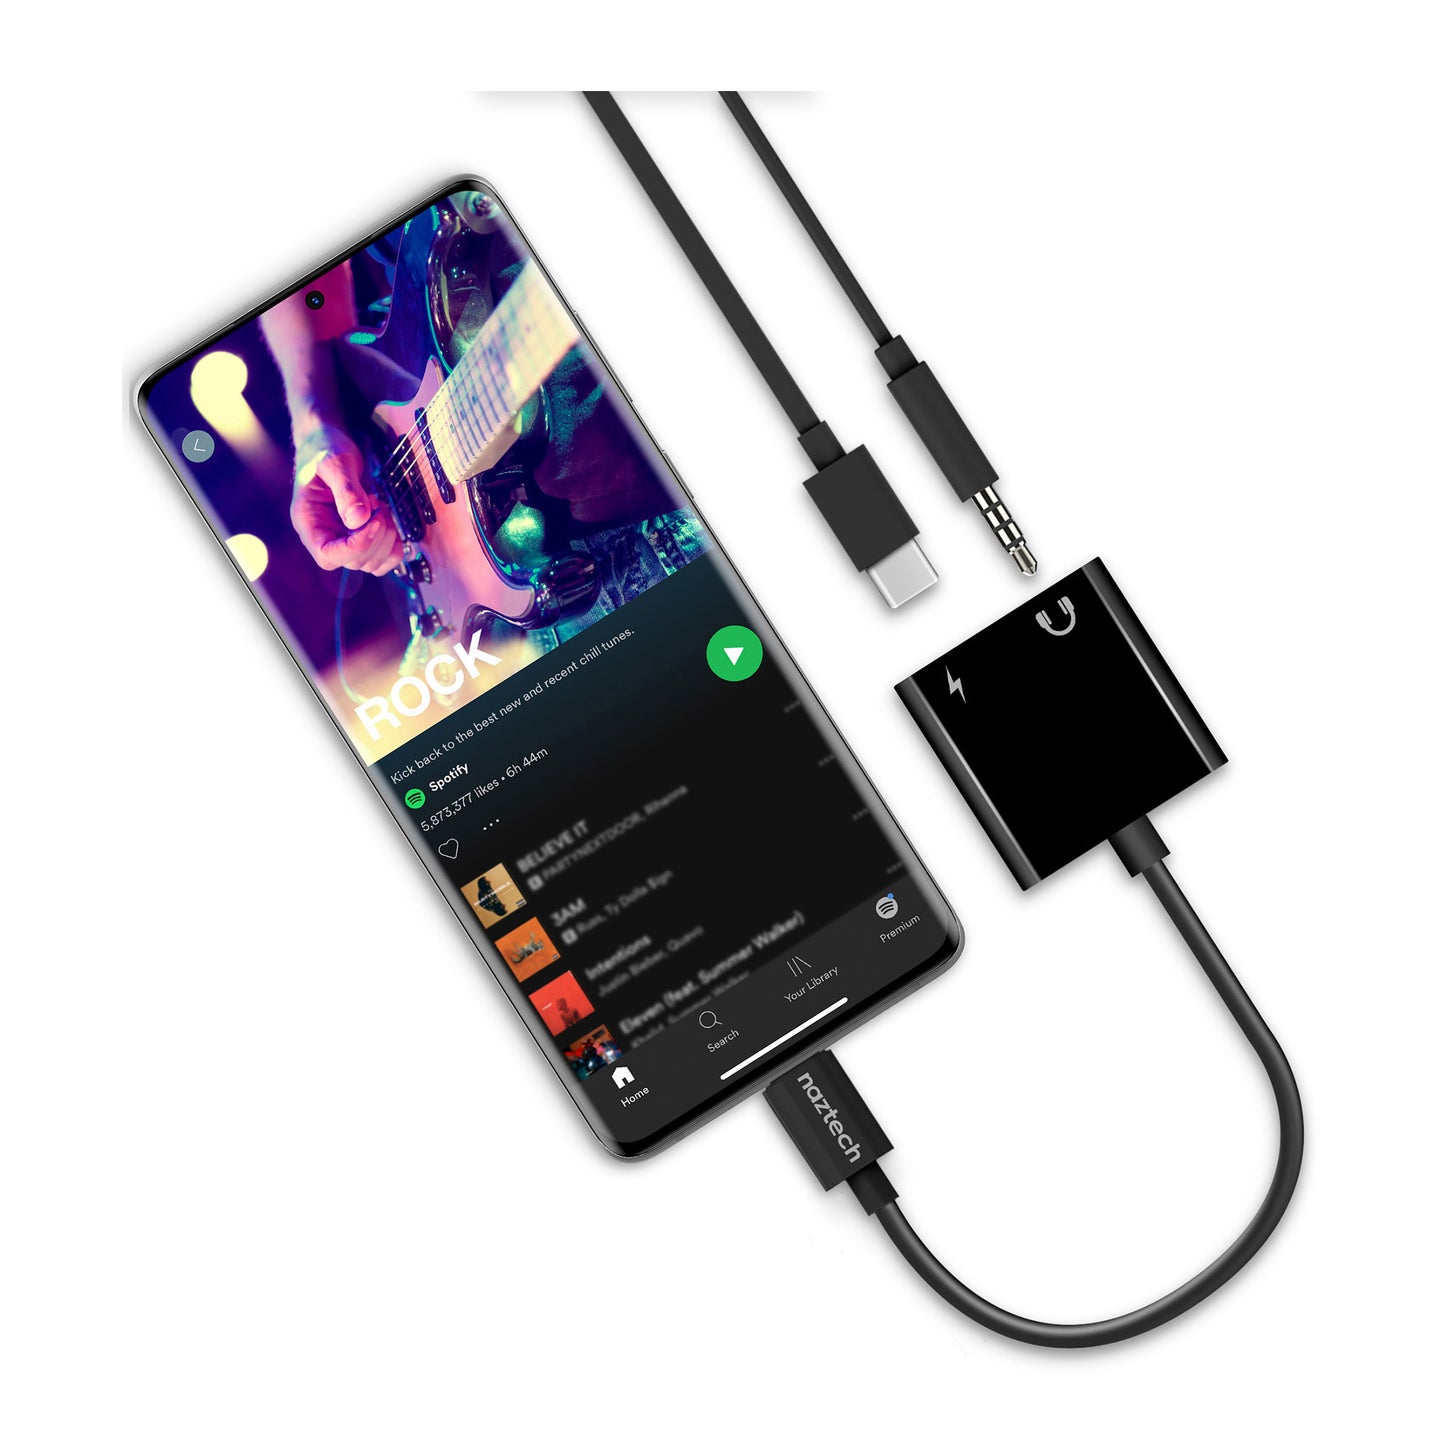 Naztech Black USB-C & 3.5mm Audio + Charge Adapter - 15-08488